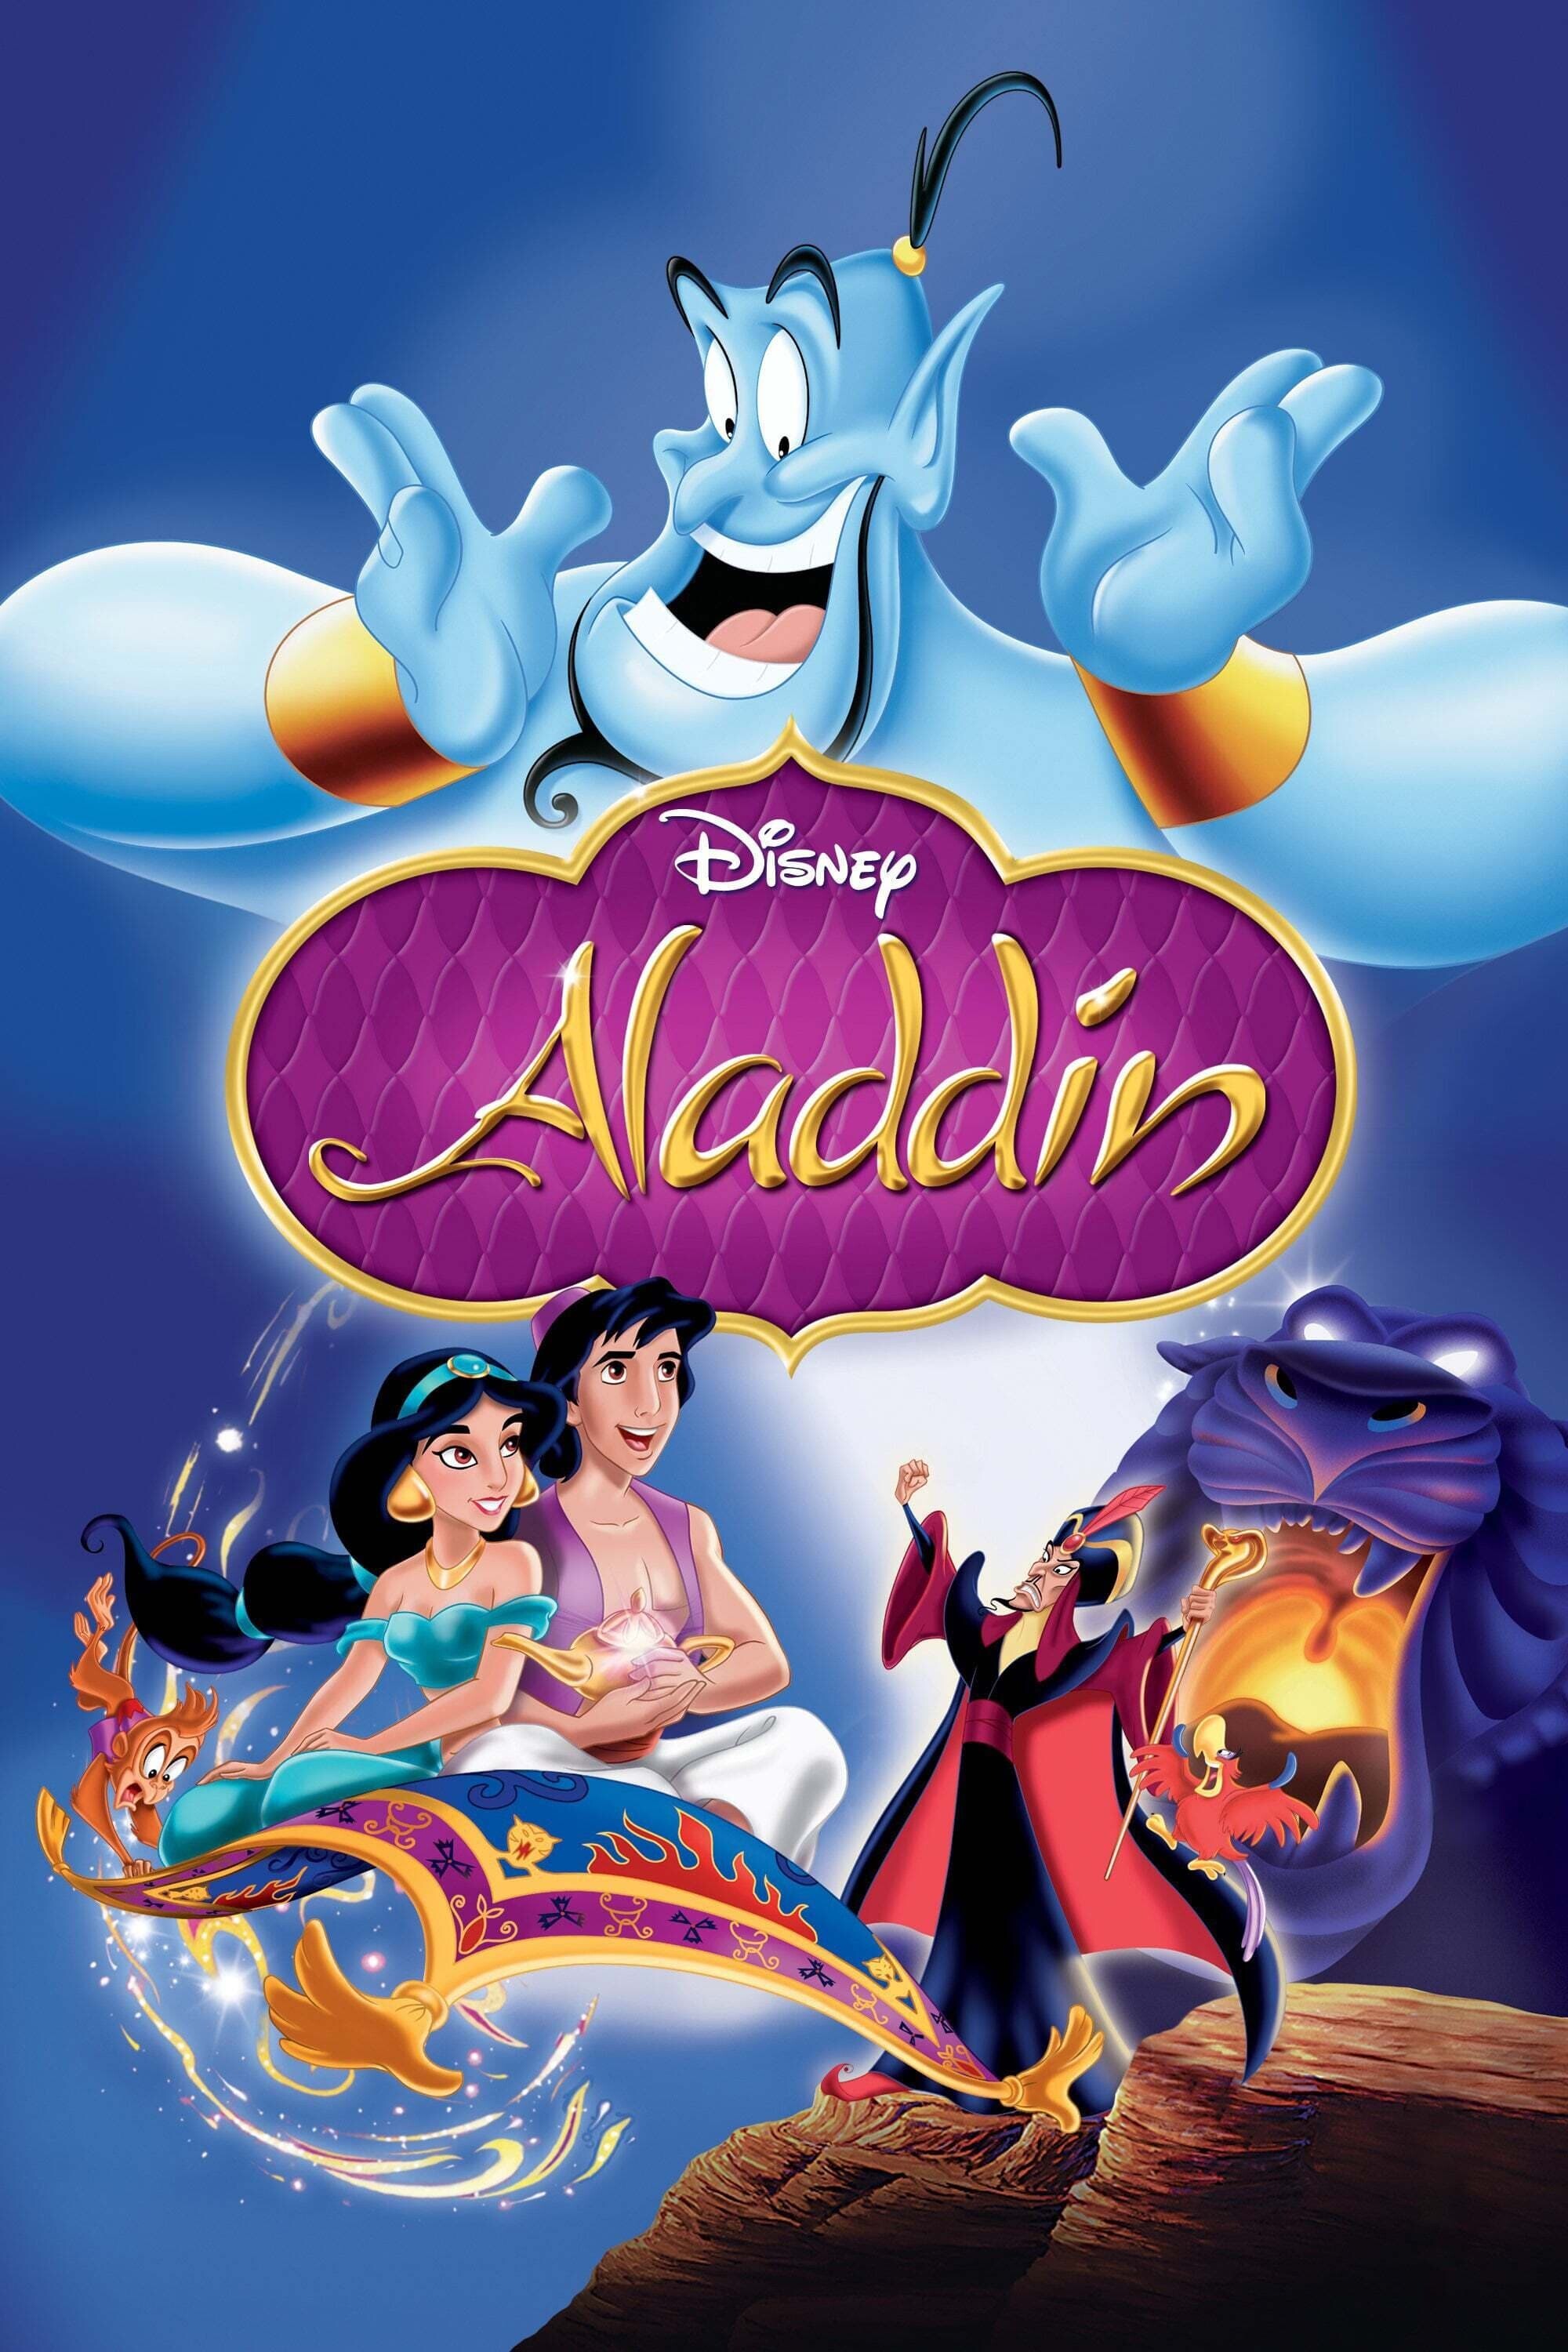 Aladdin (Cartoon): The film was produced and directed by John Musker and Ron Clements from a screenplay they co-wrote with the writing team of Ted Elliott and Terry Rossio. 2000x3000 HD Background.